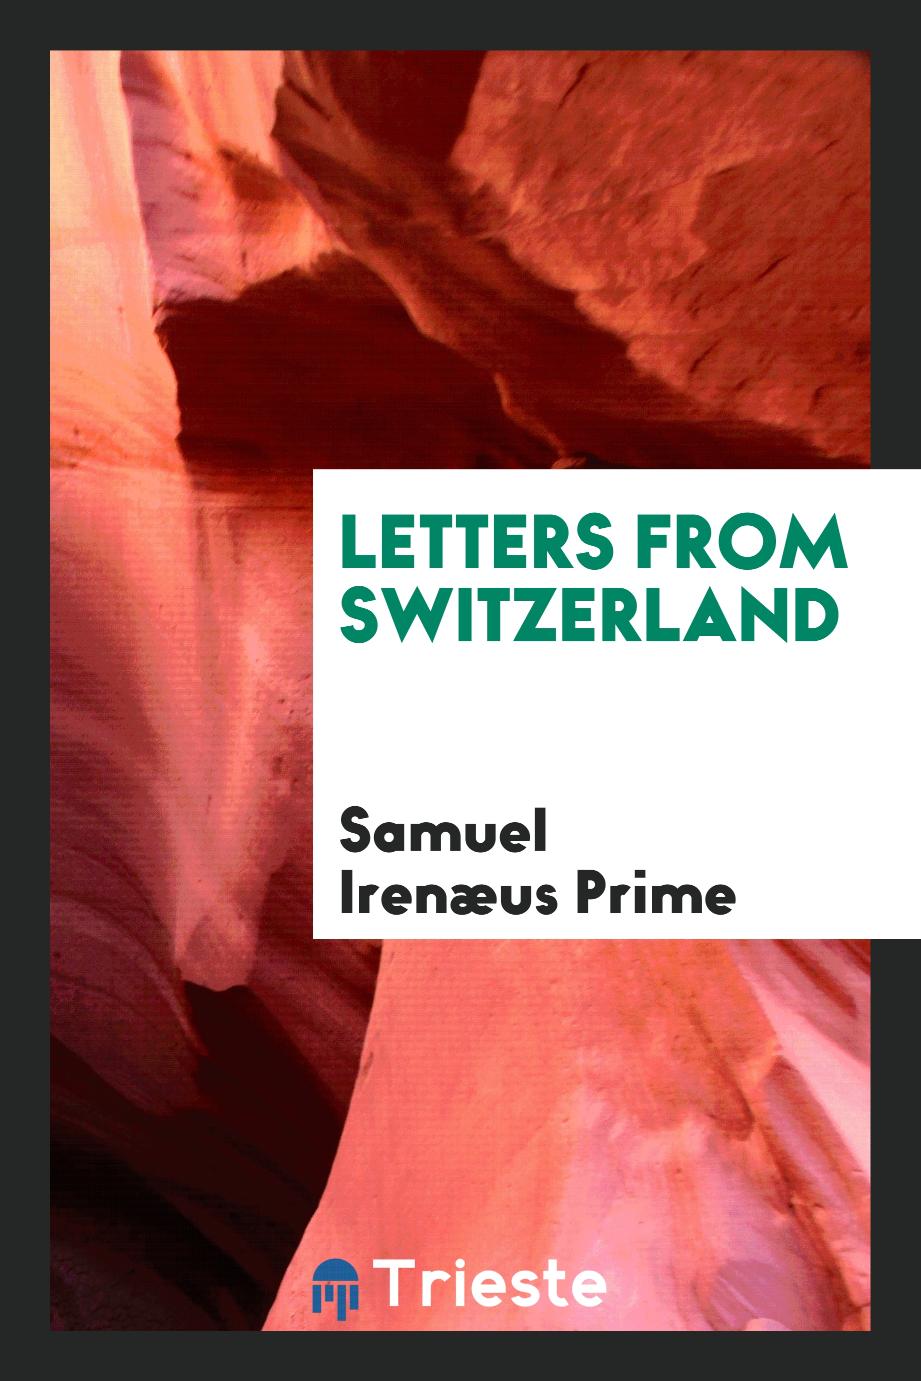 Letters from Switzerland